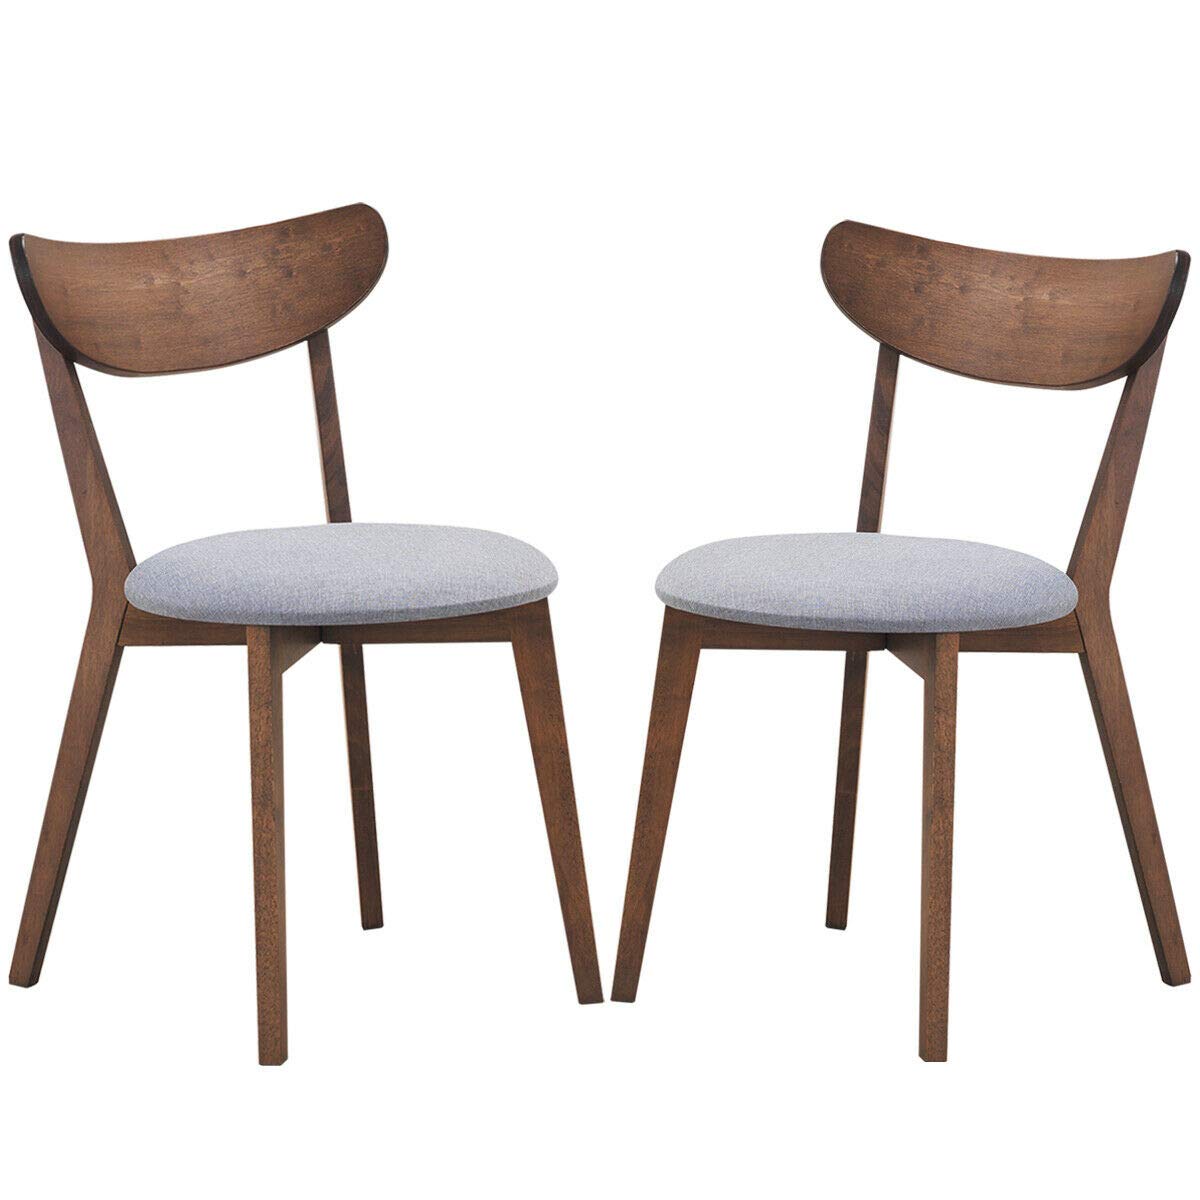 Giantex Set of 2 Dining Chairs